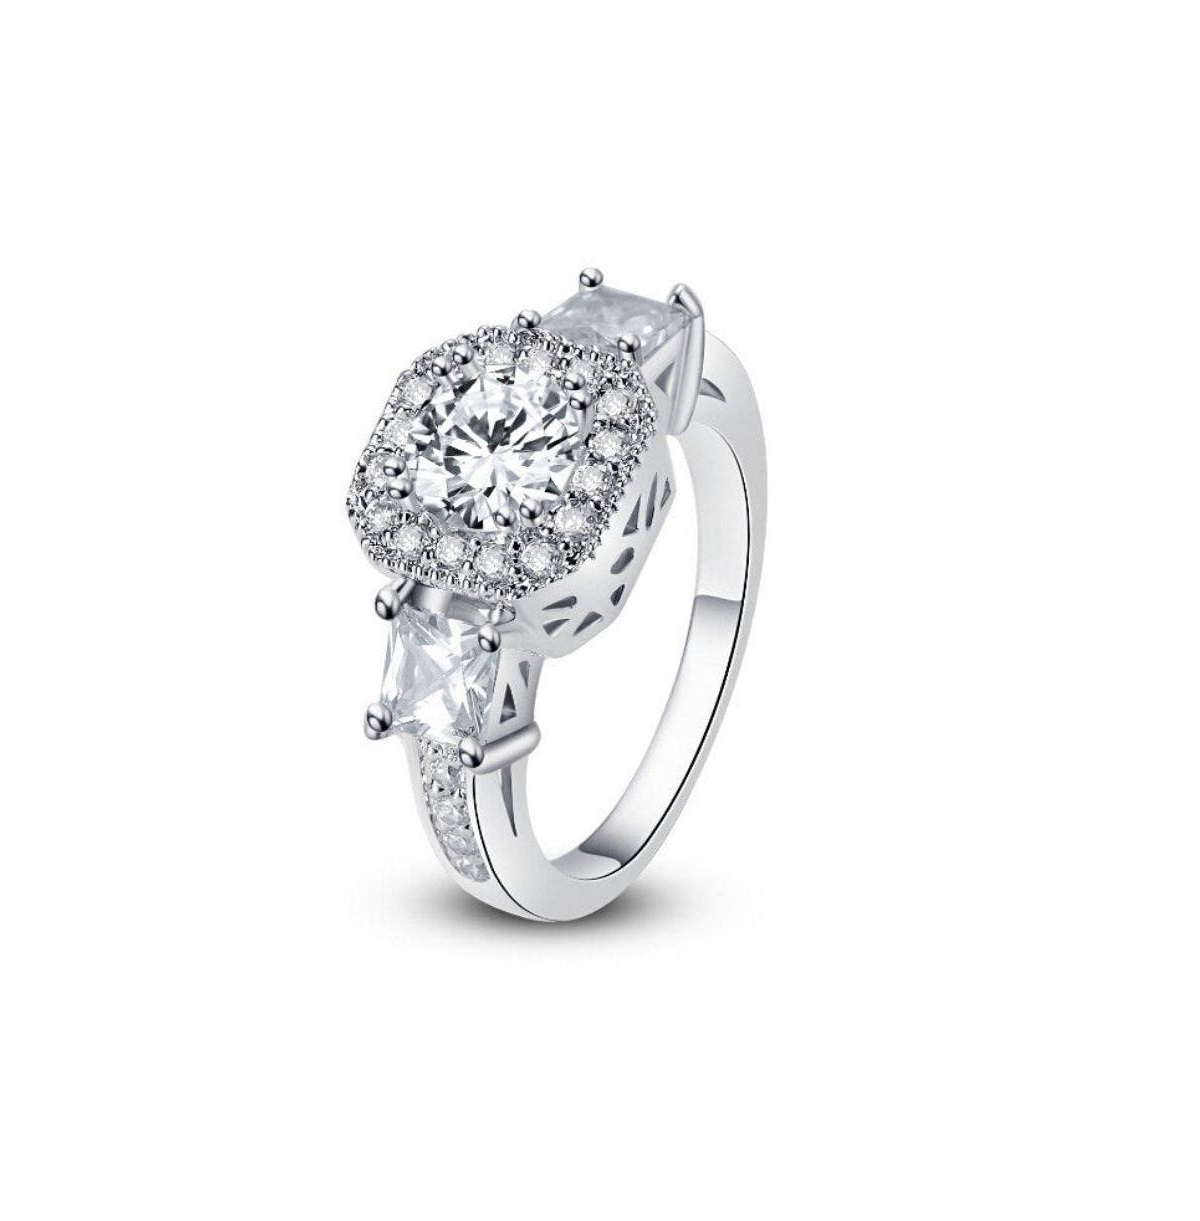 Cubic Zirconia Rings- "Exotic Crystal Ring" - Silver